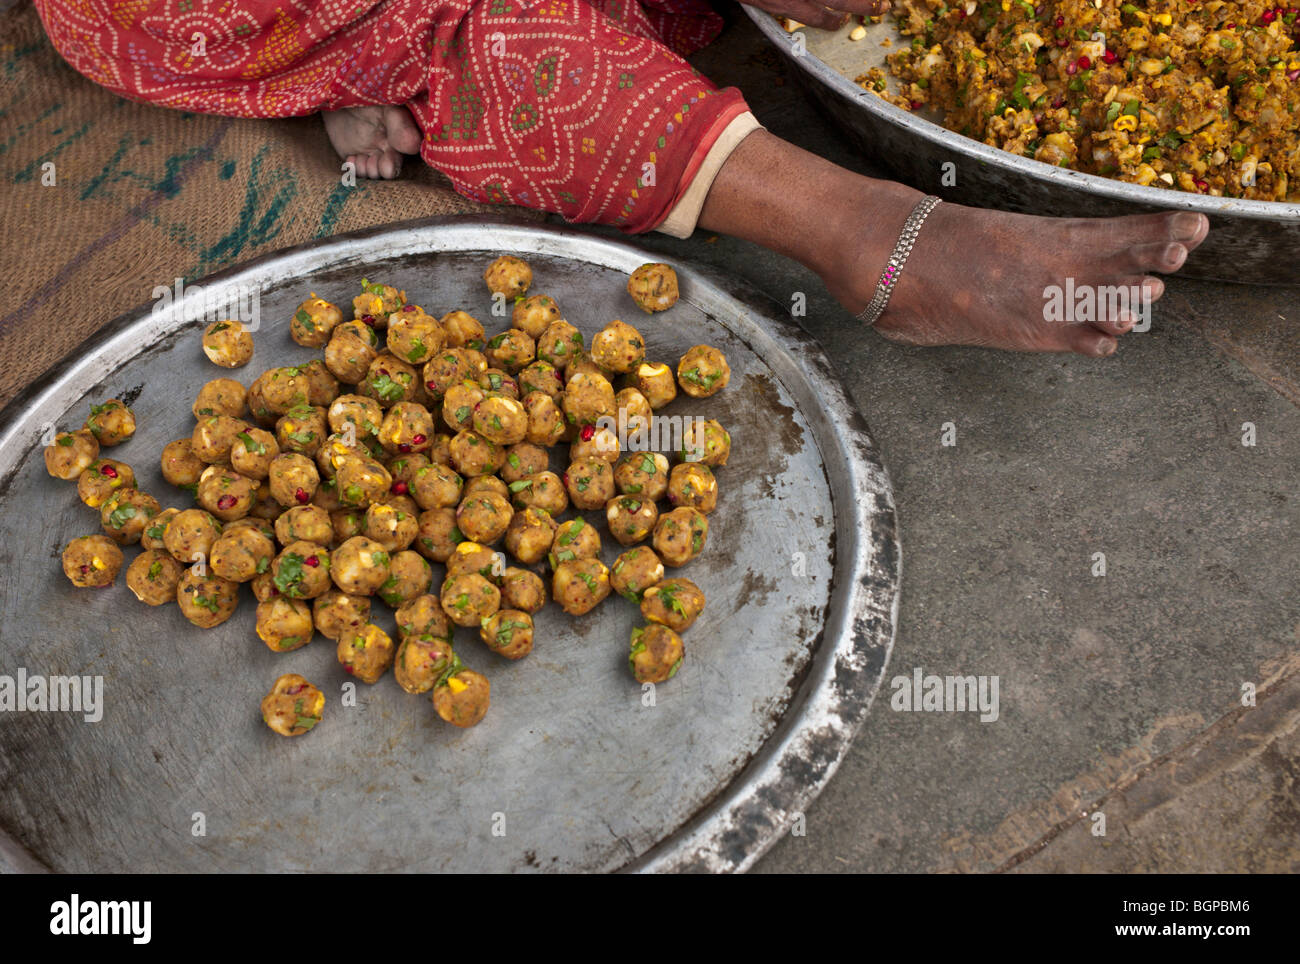 A woman making a chickpea snack in an Hindu temple, Jaipur, India Stock Photo